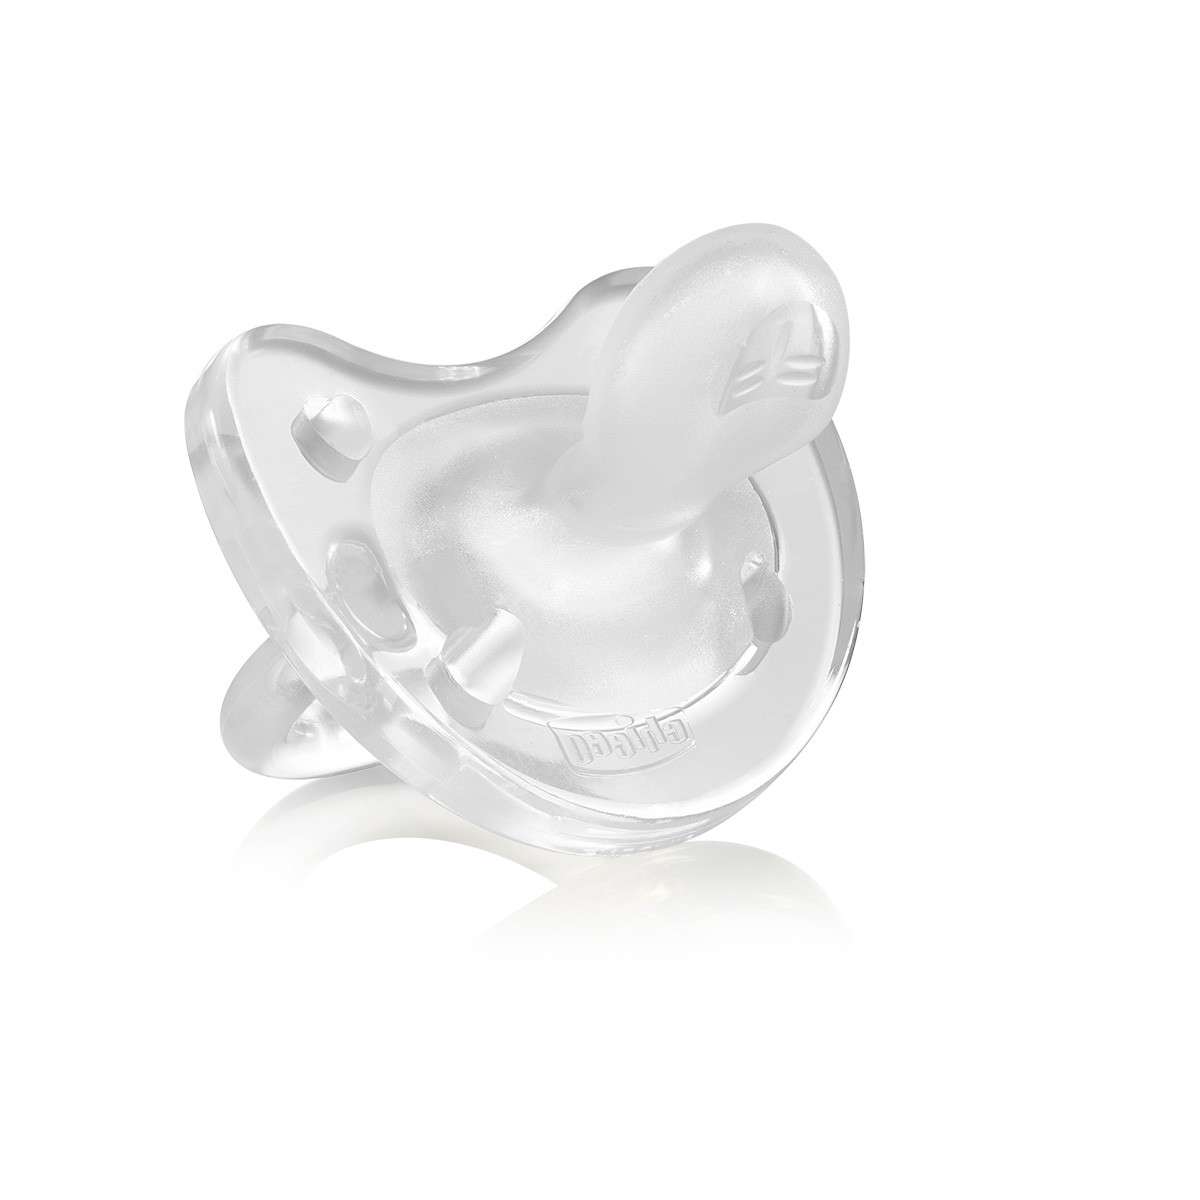 PhysioForma Soft Silicone Soother